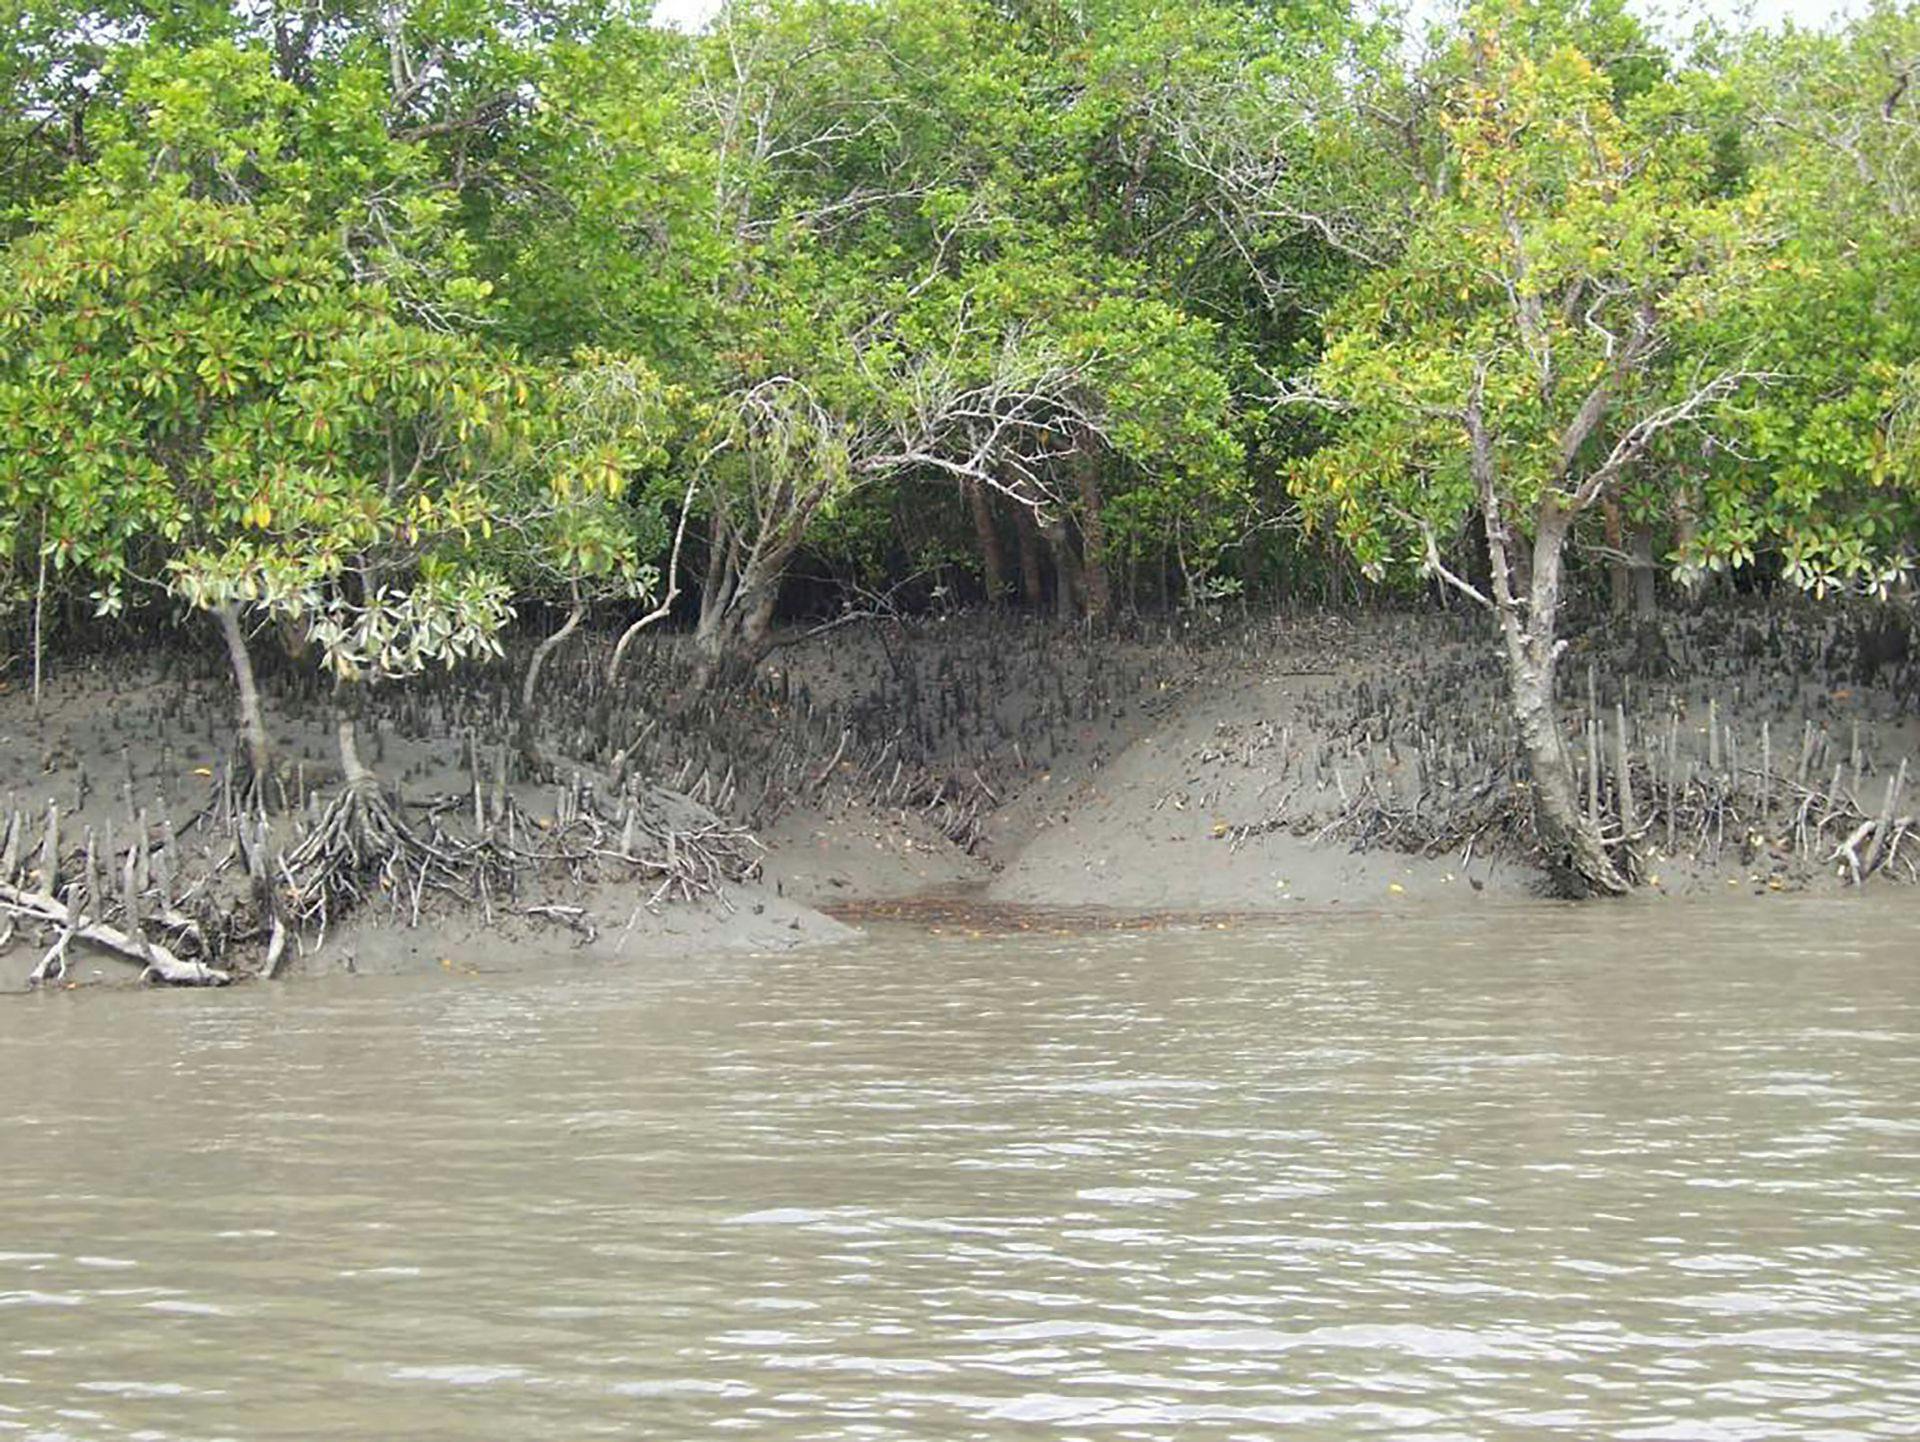 Mangrove forests of the Sundarbans